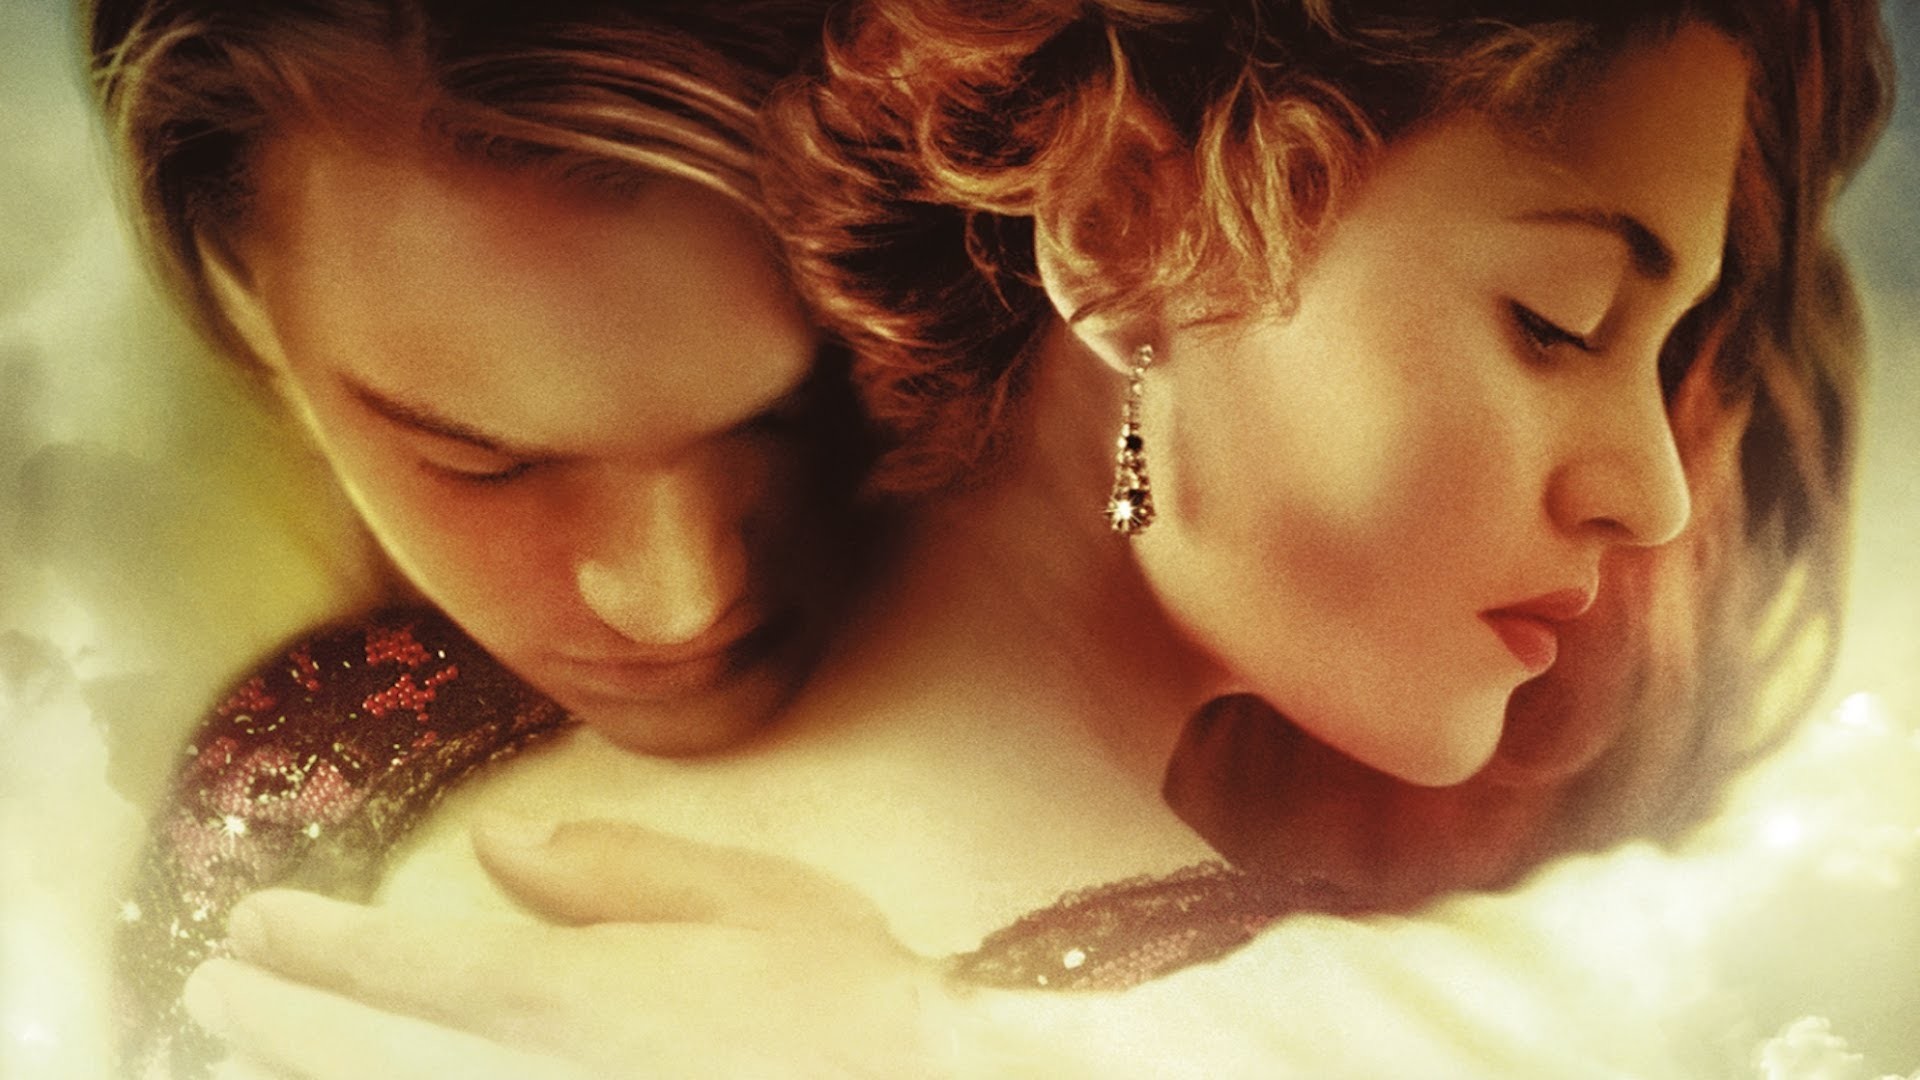 1920x1080 View all titanic movie jack and rose Wallpapers. Report this Image?  favorite enlarge^  ...